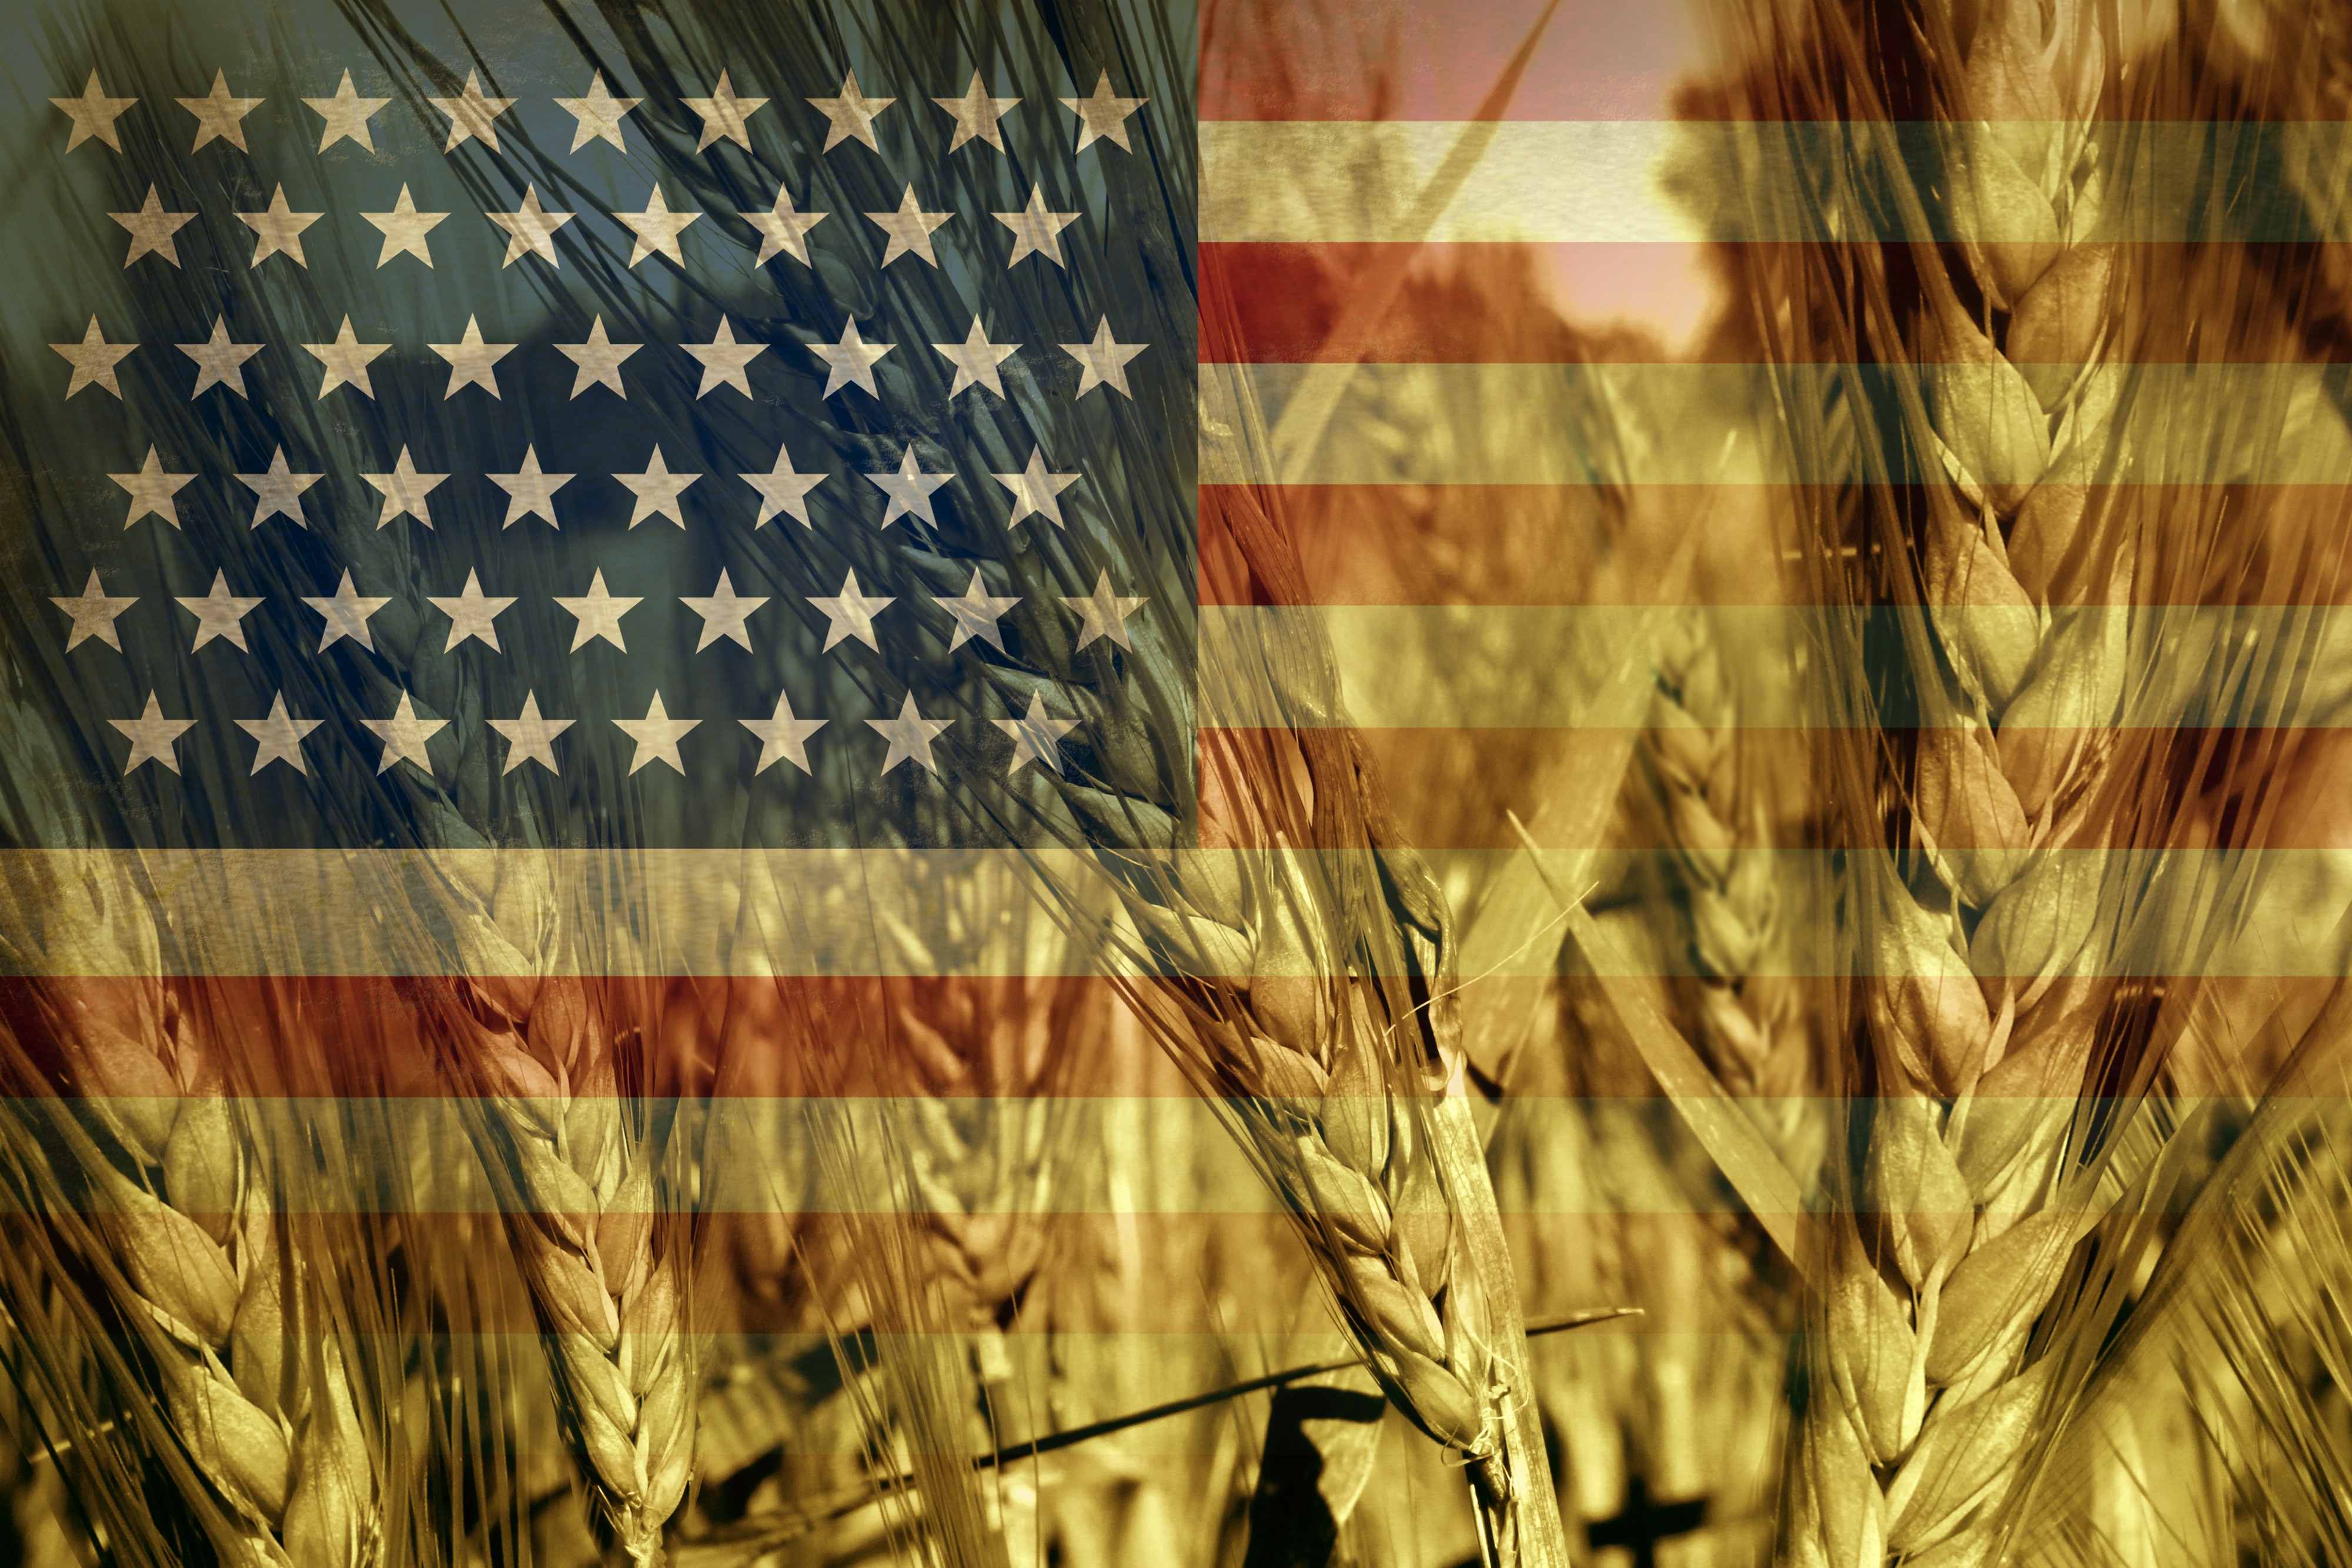 American Agriculture